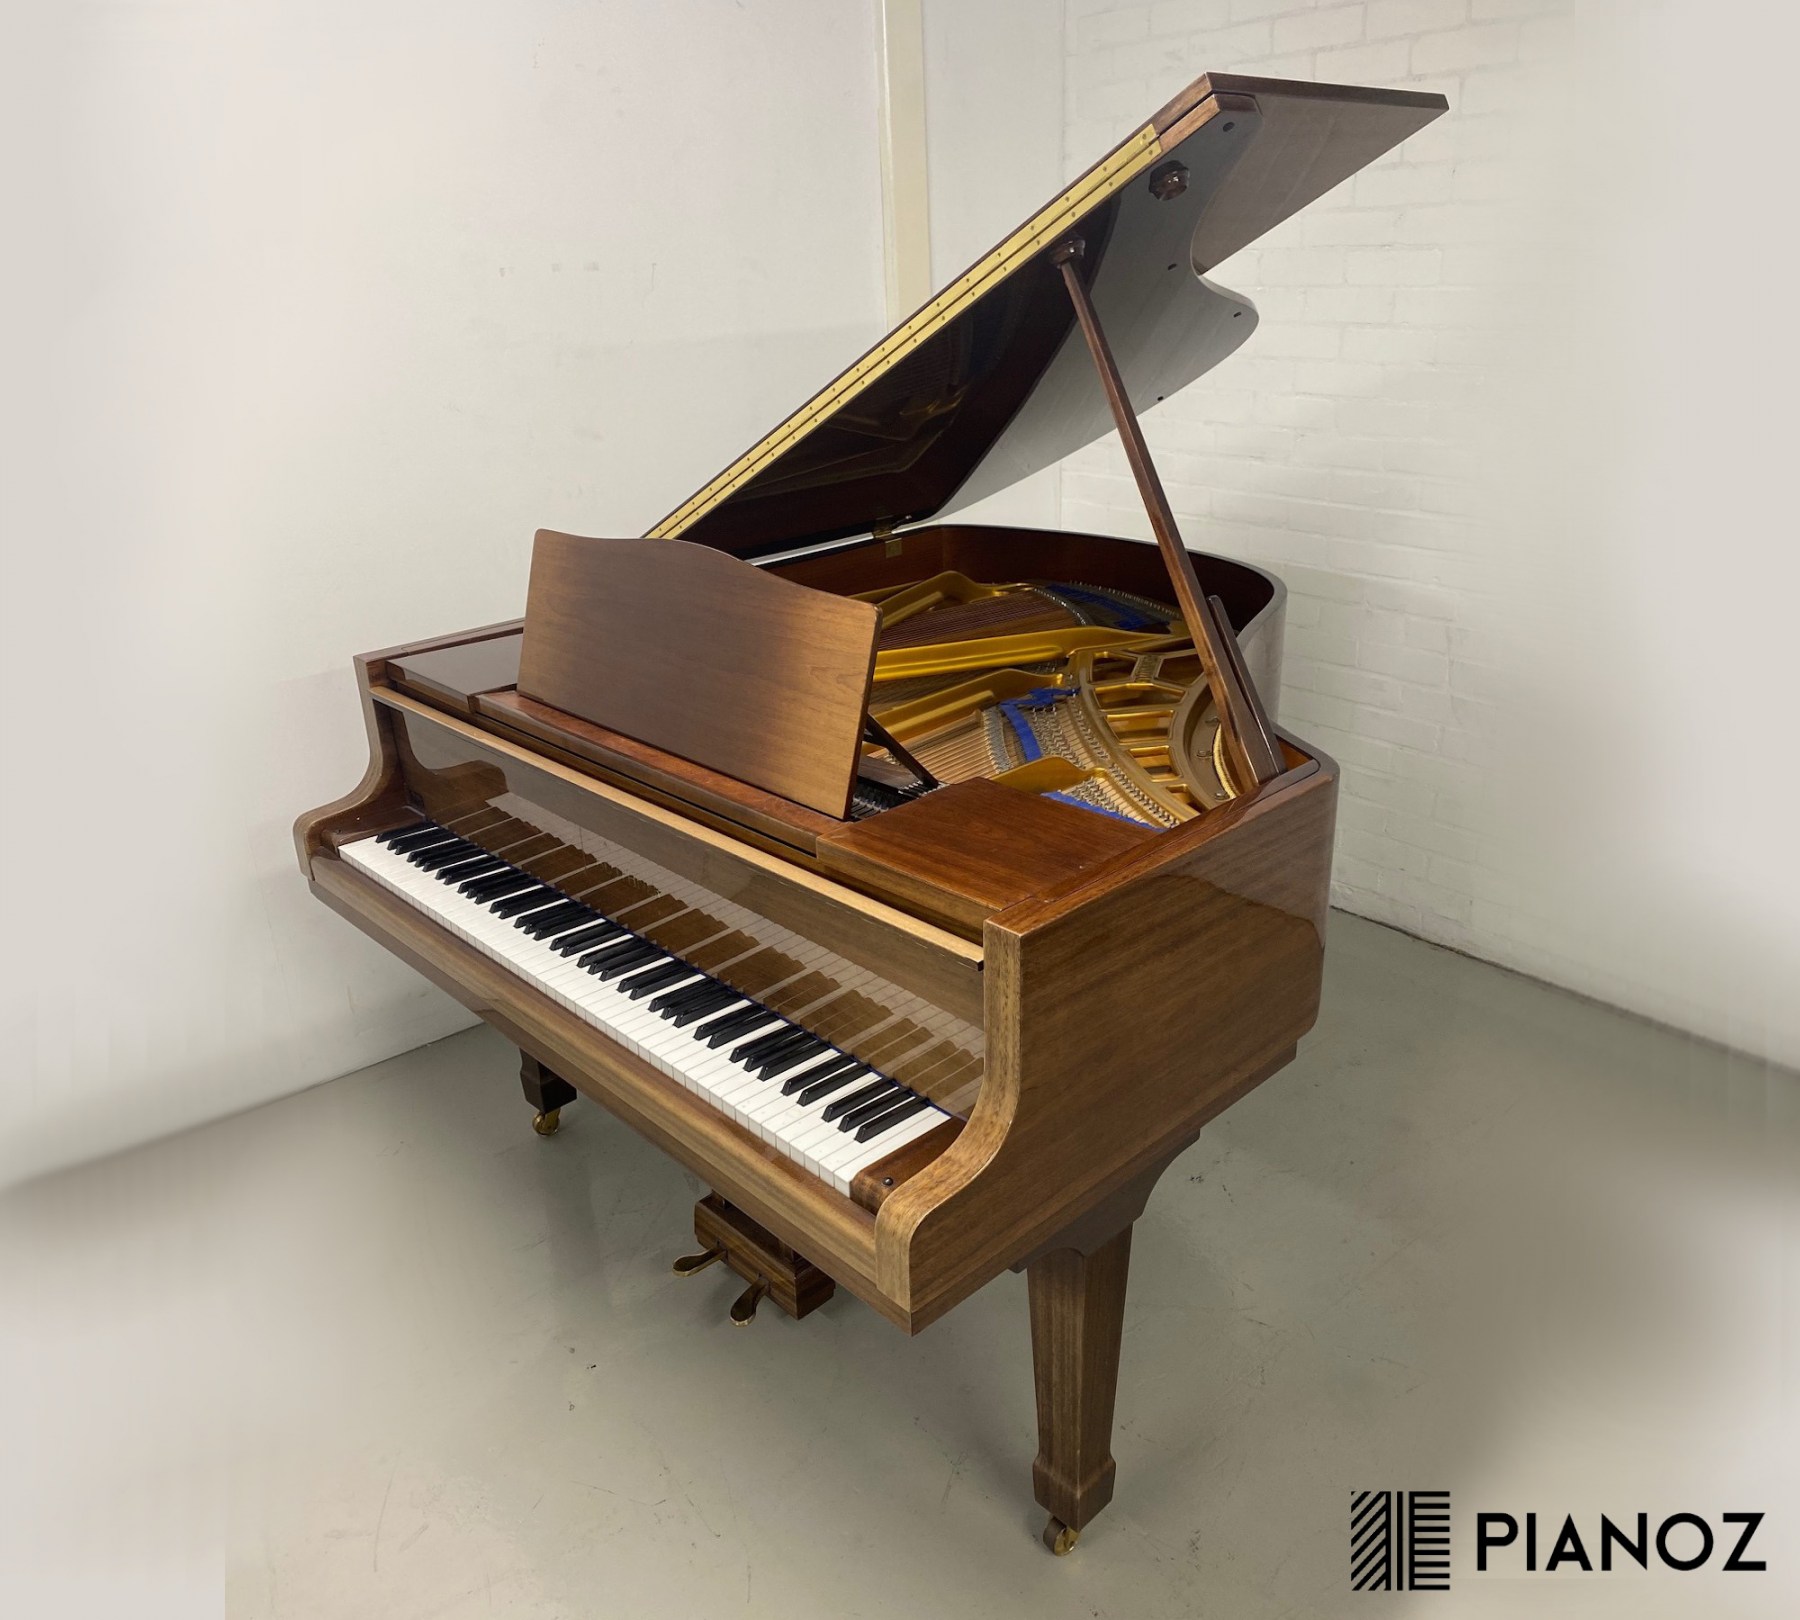 Bluthner Model 10 1988 Baby Grand Piano piano for sale in UK